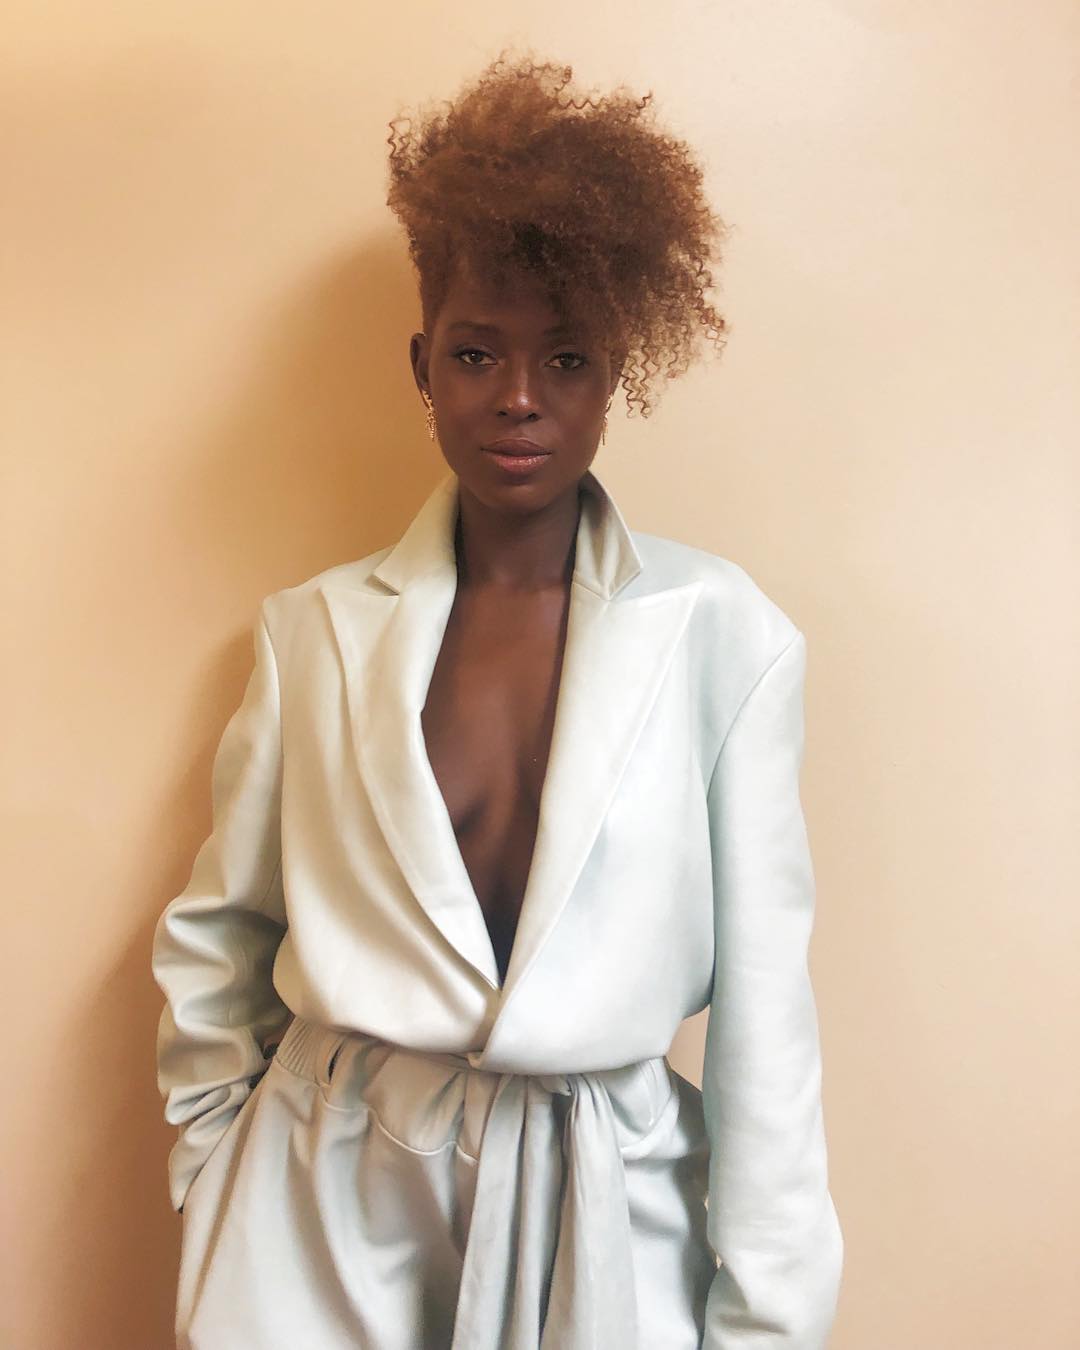 jodie turner-smith say women who give birth are 'goddesses'